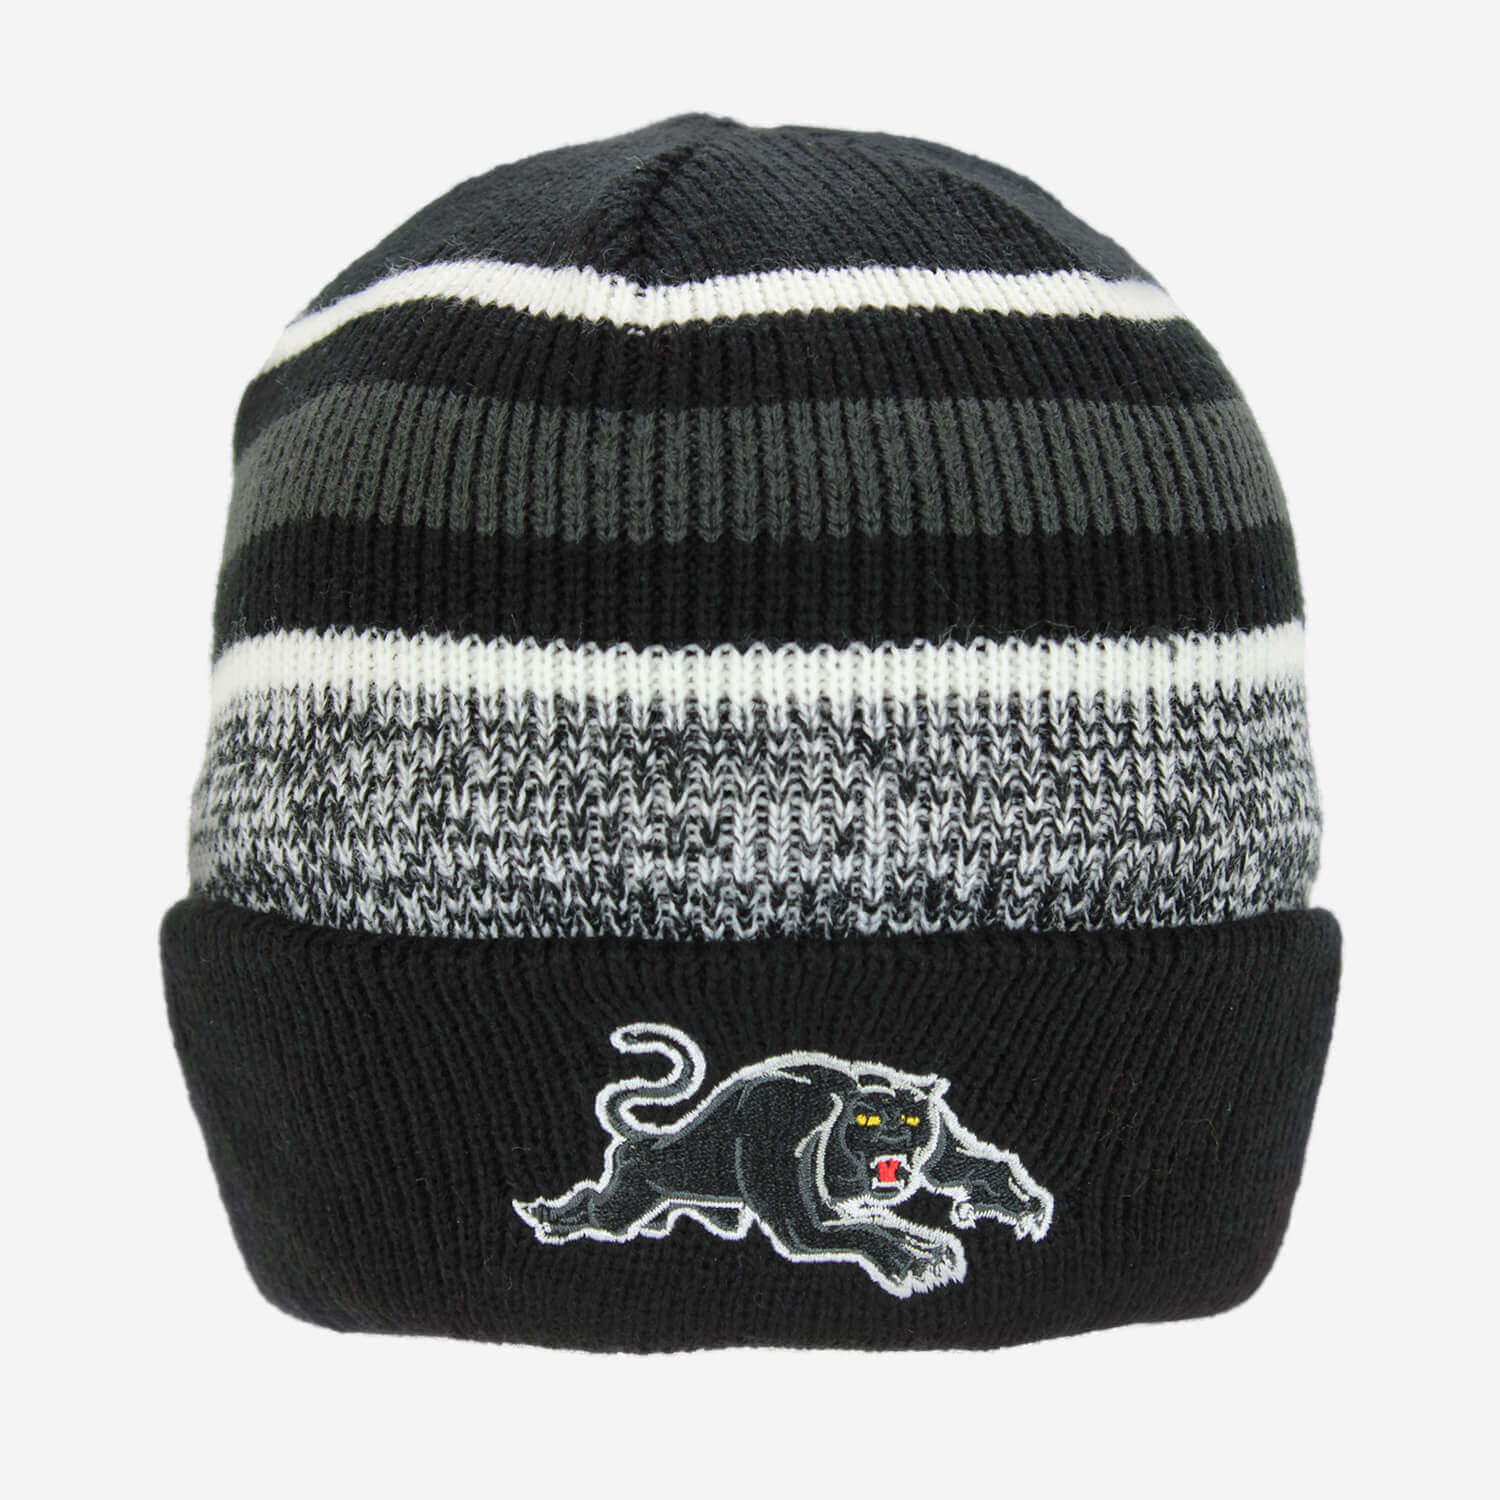 PENRITH PANTHERS NRL CLUSTER BEANIE_BPENRITH PANTHERS_STUBBY CLUB